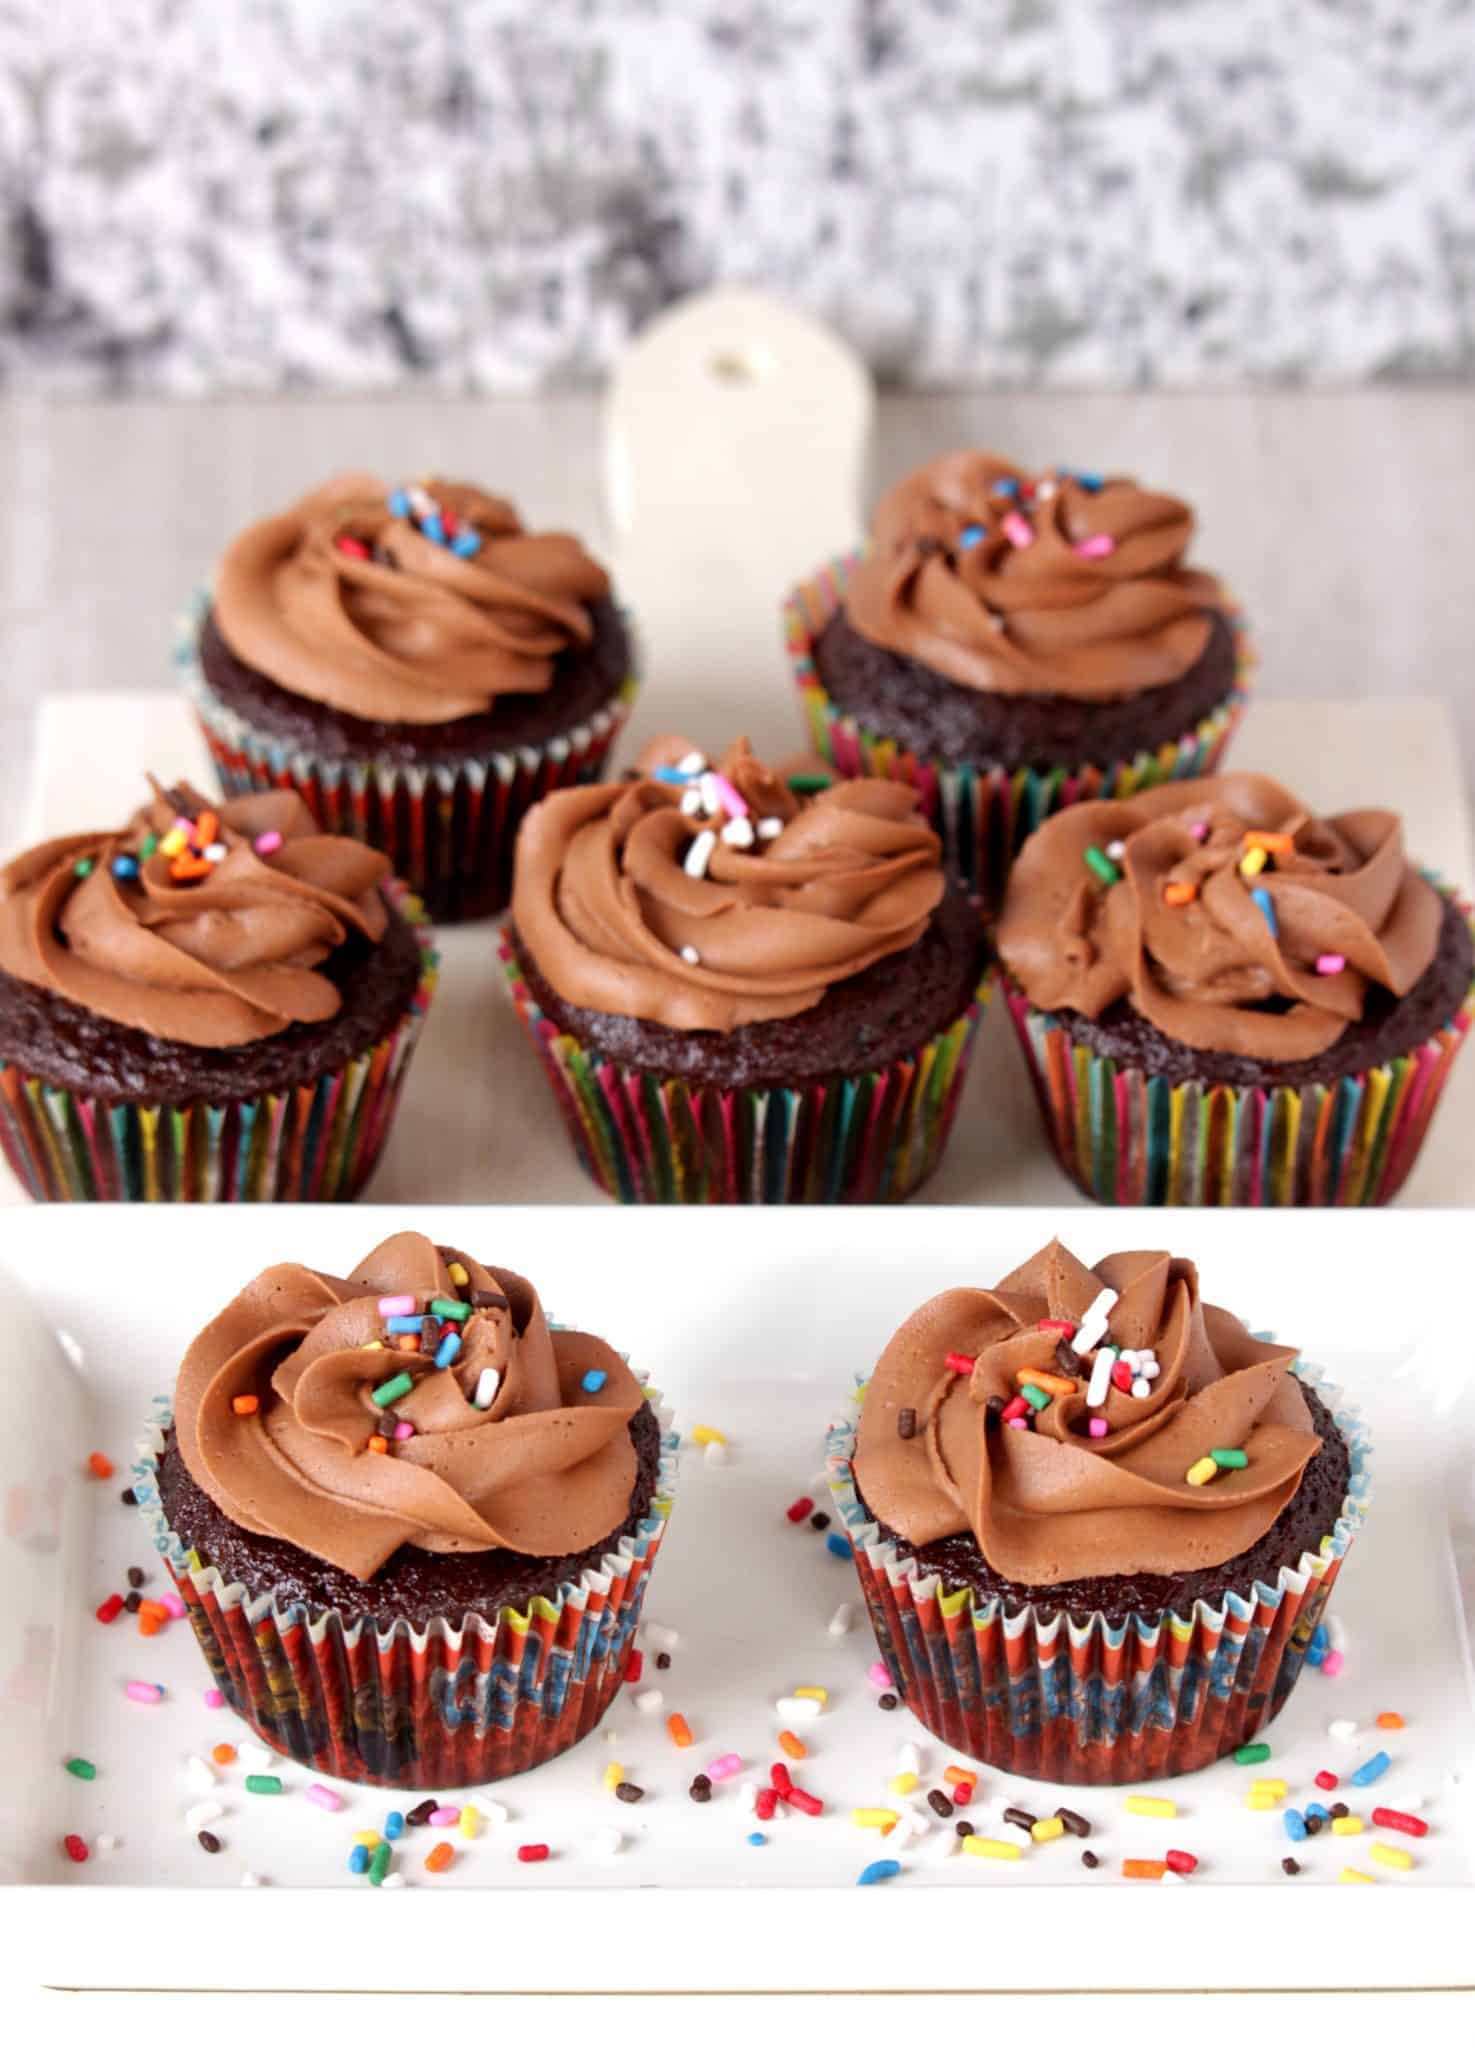 Chocolate Cupcakes with Chocolate Buttercream Frosting in a tray